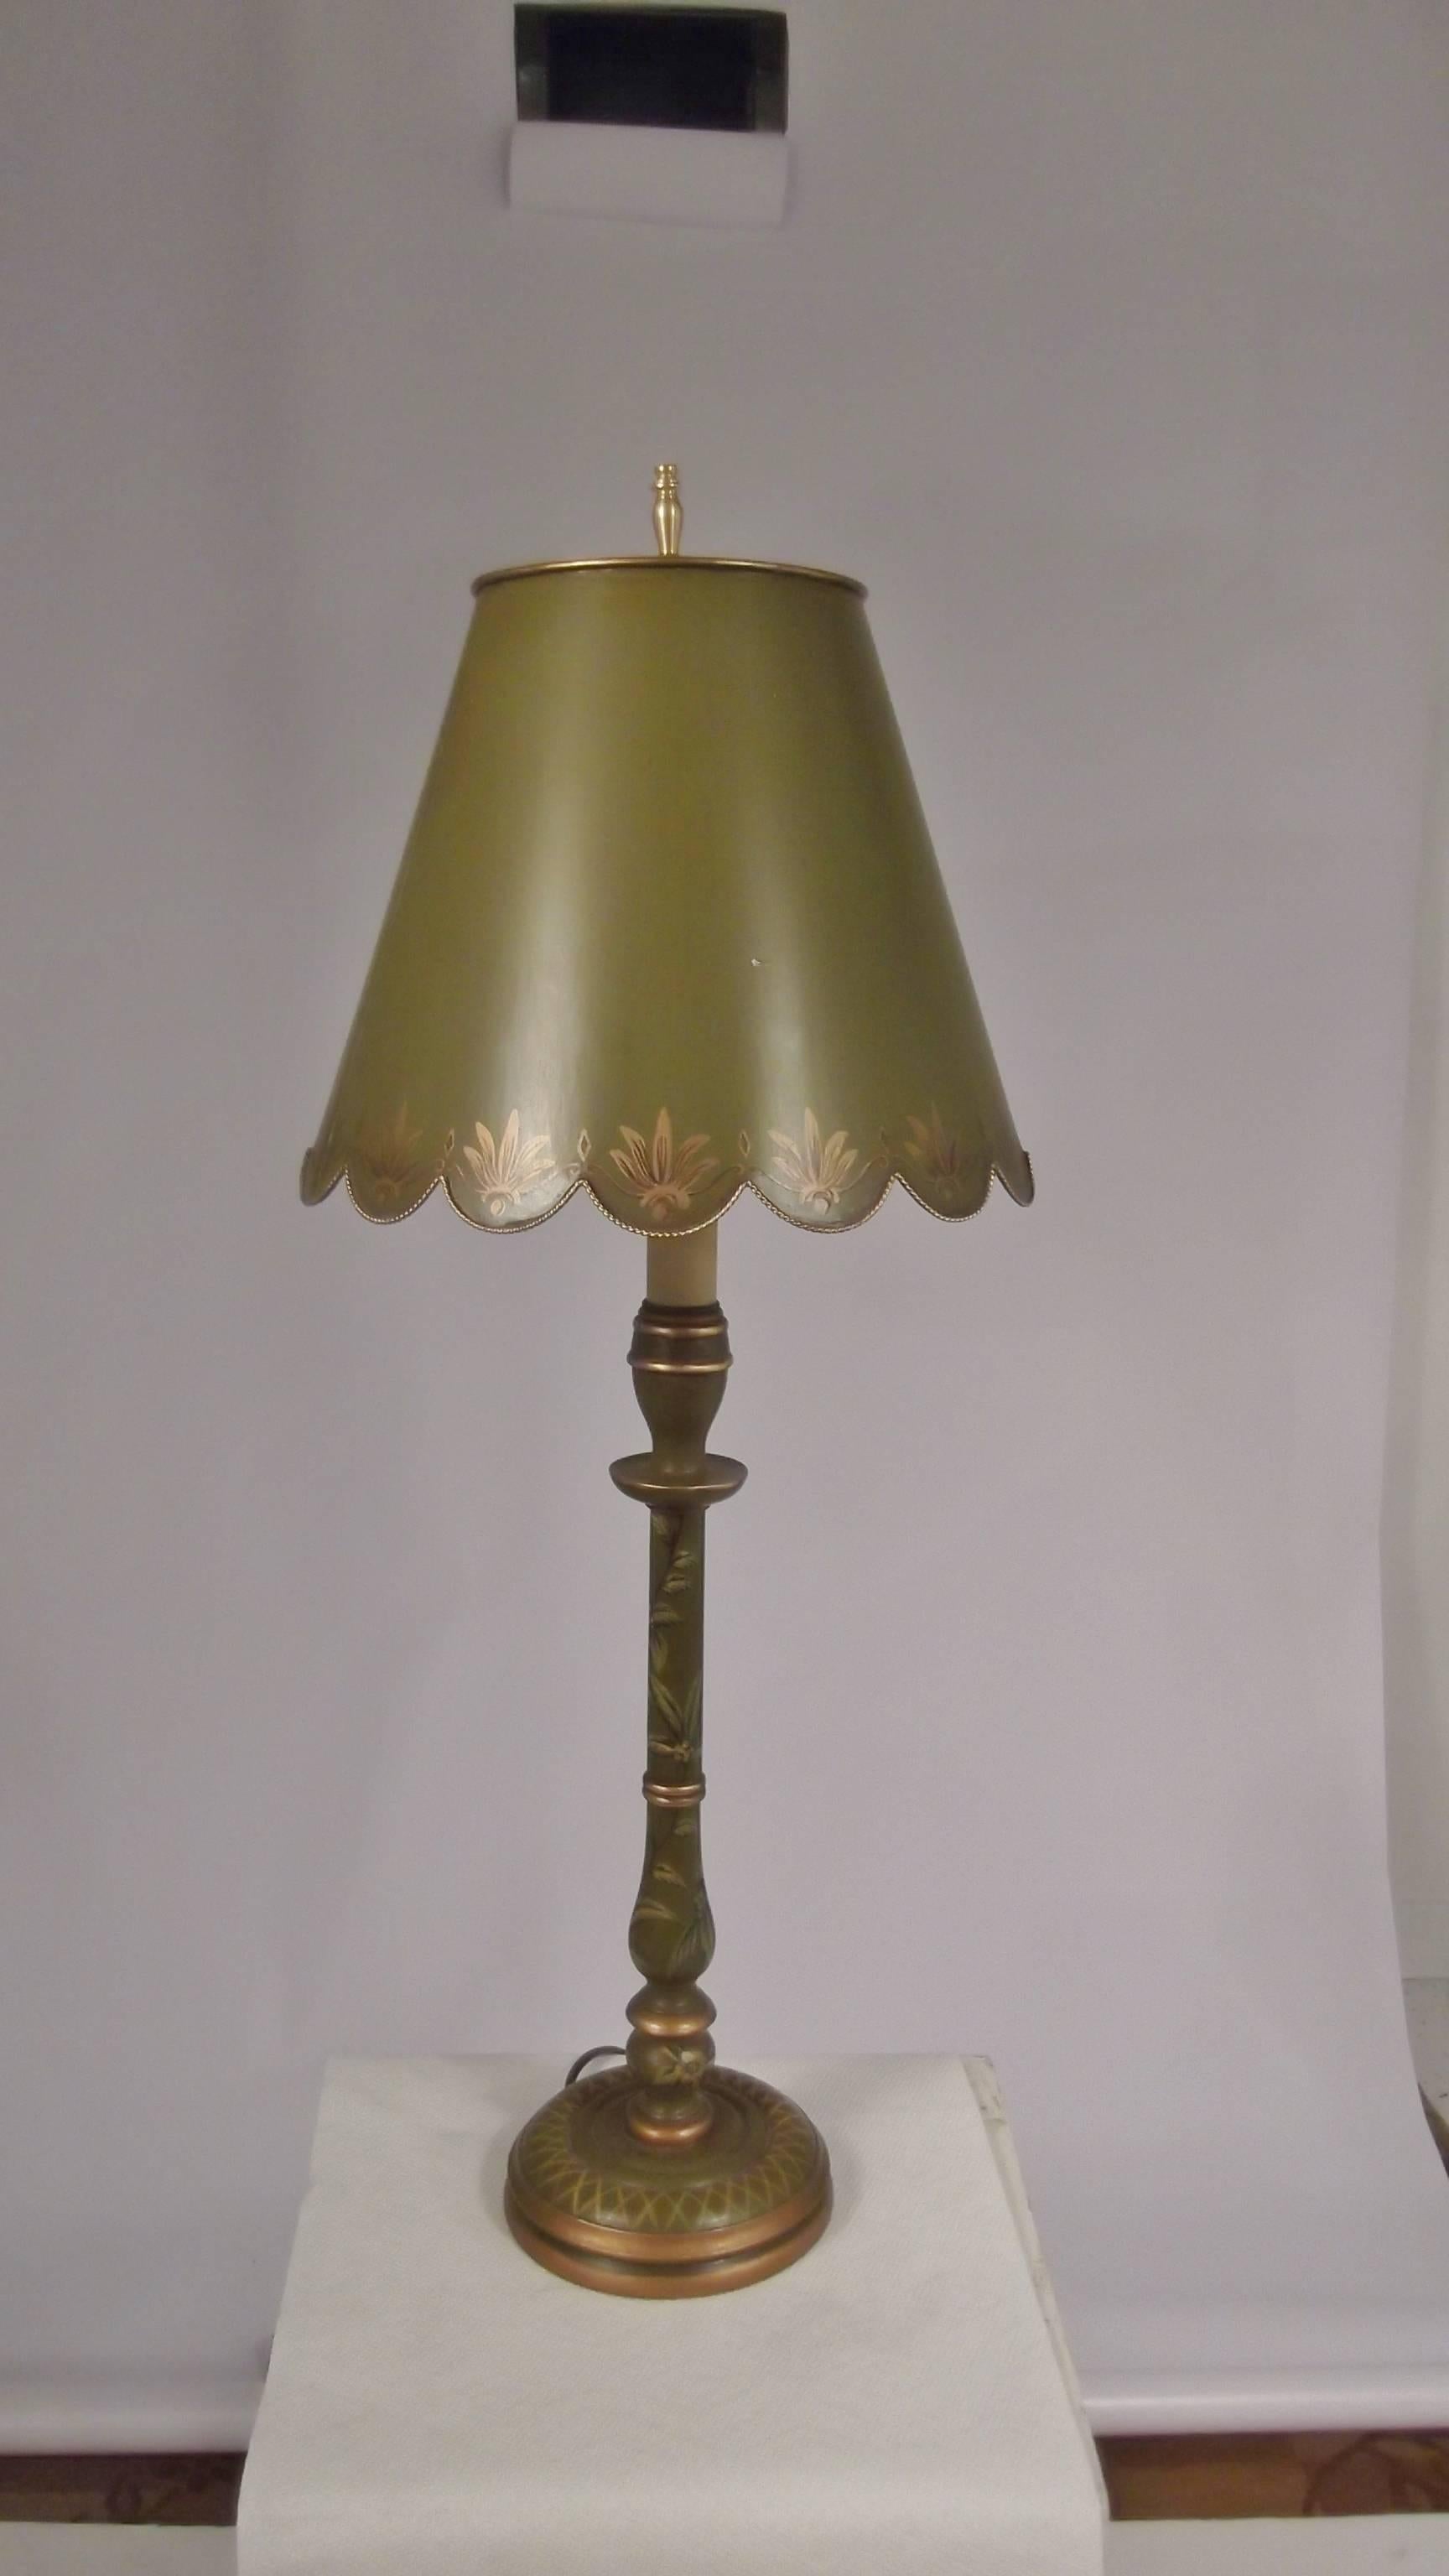 Italian hand-painted tole shaded lamps with hand-painted wood candle stick lamp bases. Apple green with hand-painted gilt decoration with white lined scalloped shades. Newer sockets and wiring.